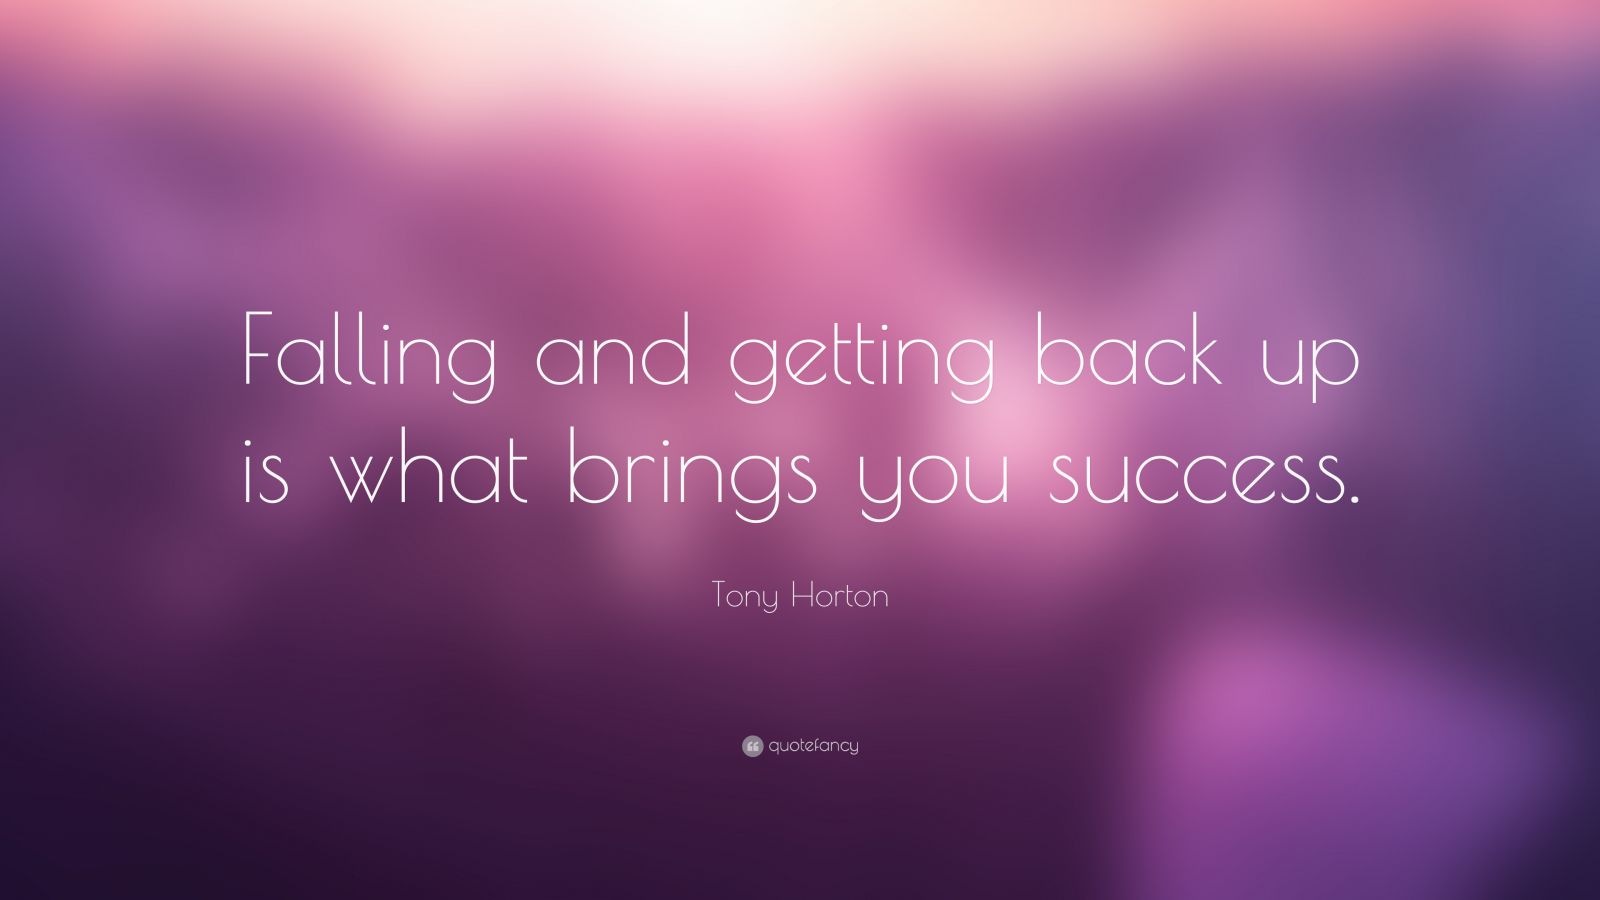 Tony Horton Quote: “Falling and getting back up is what brings you